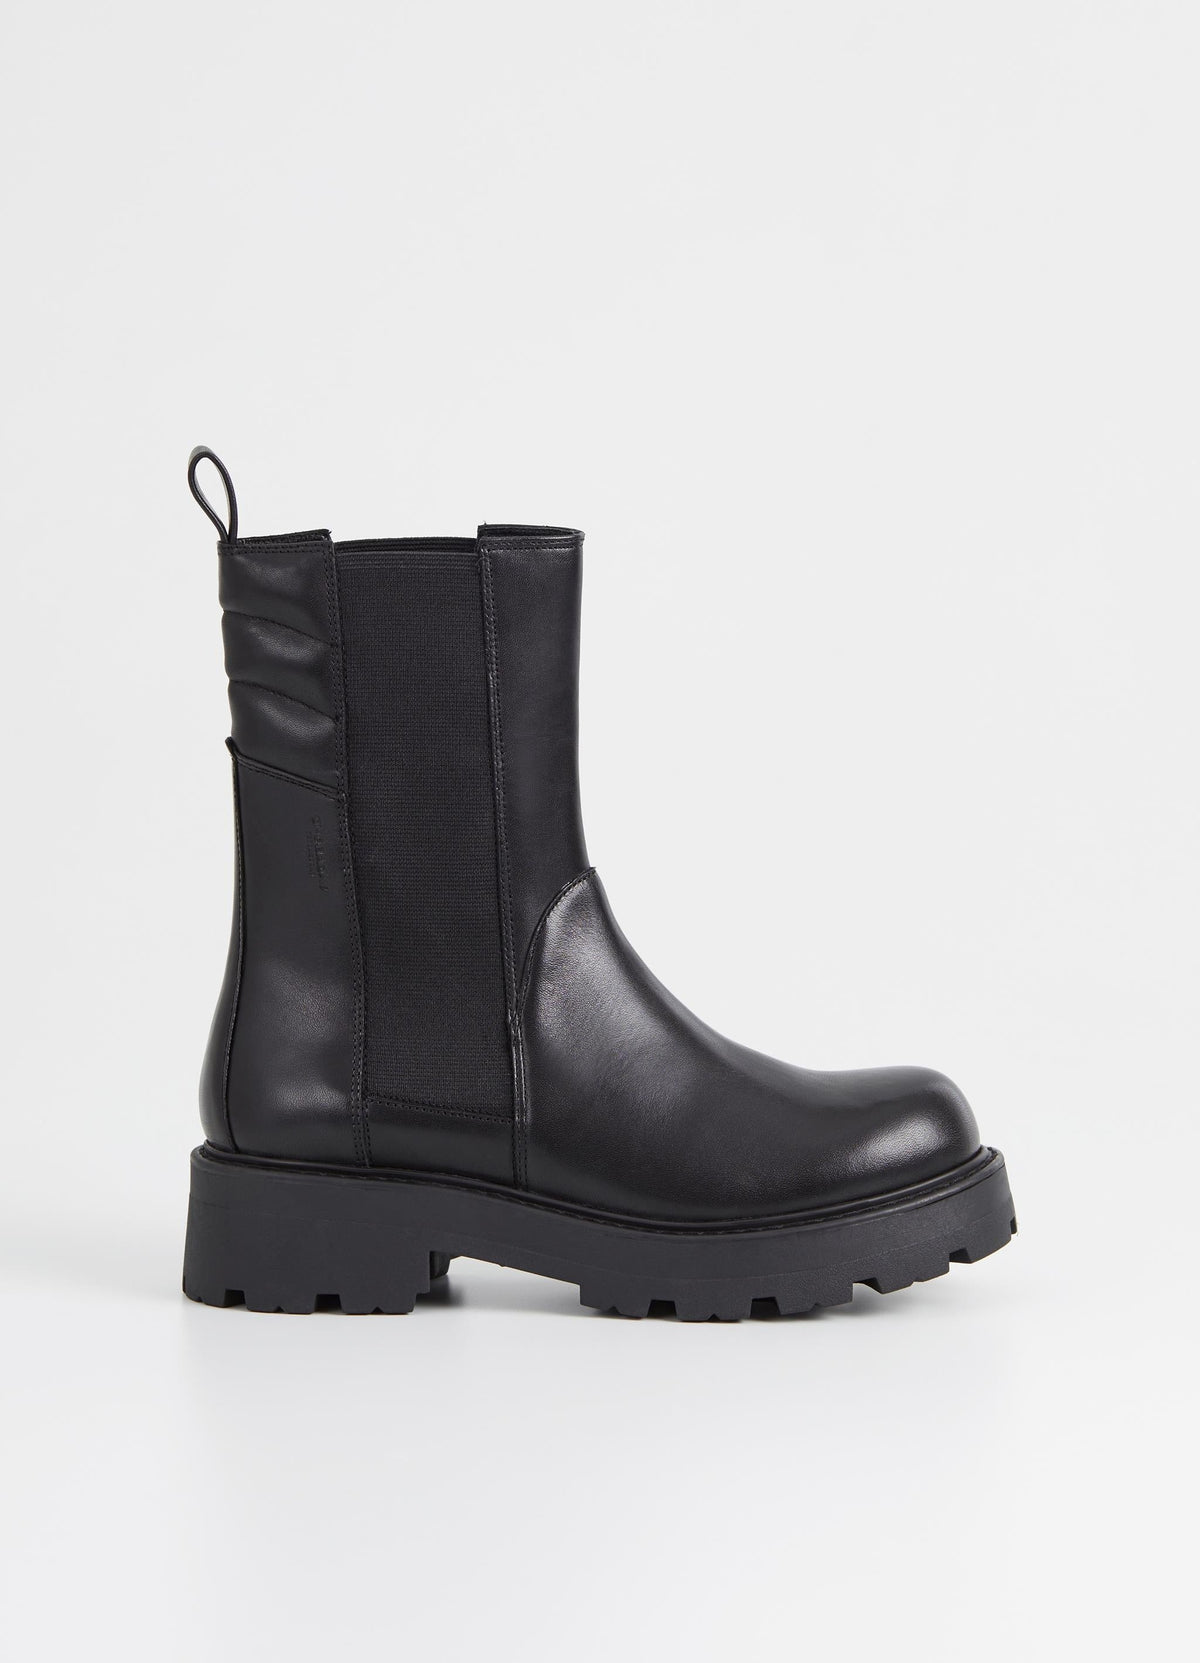 Chunky smooth black leather chelsea boot with elasticated side panels